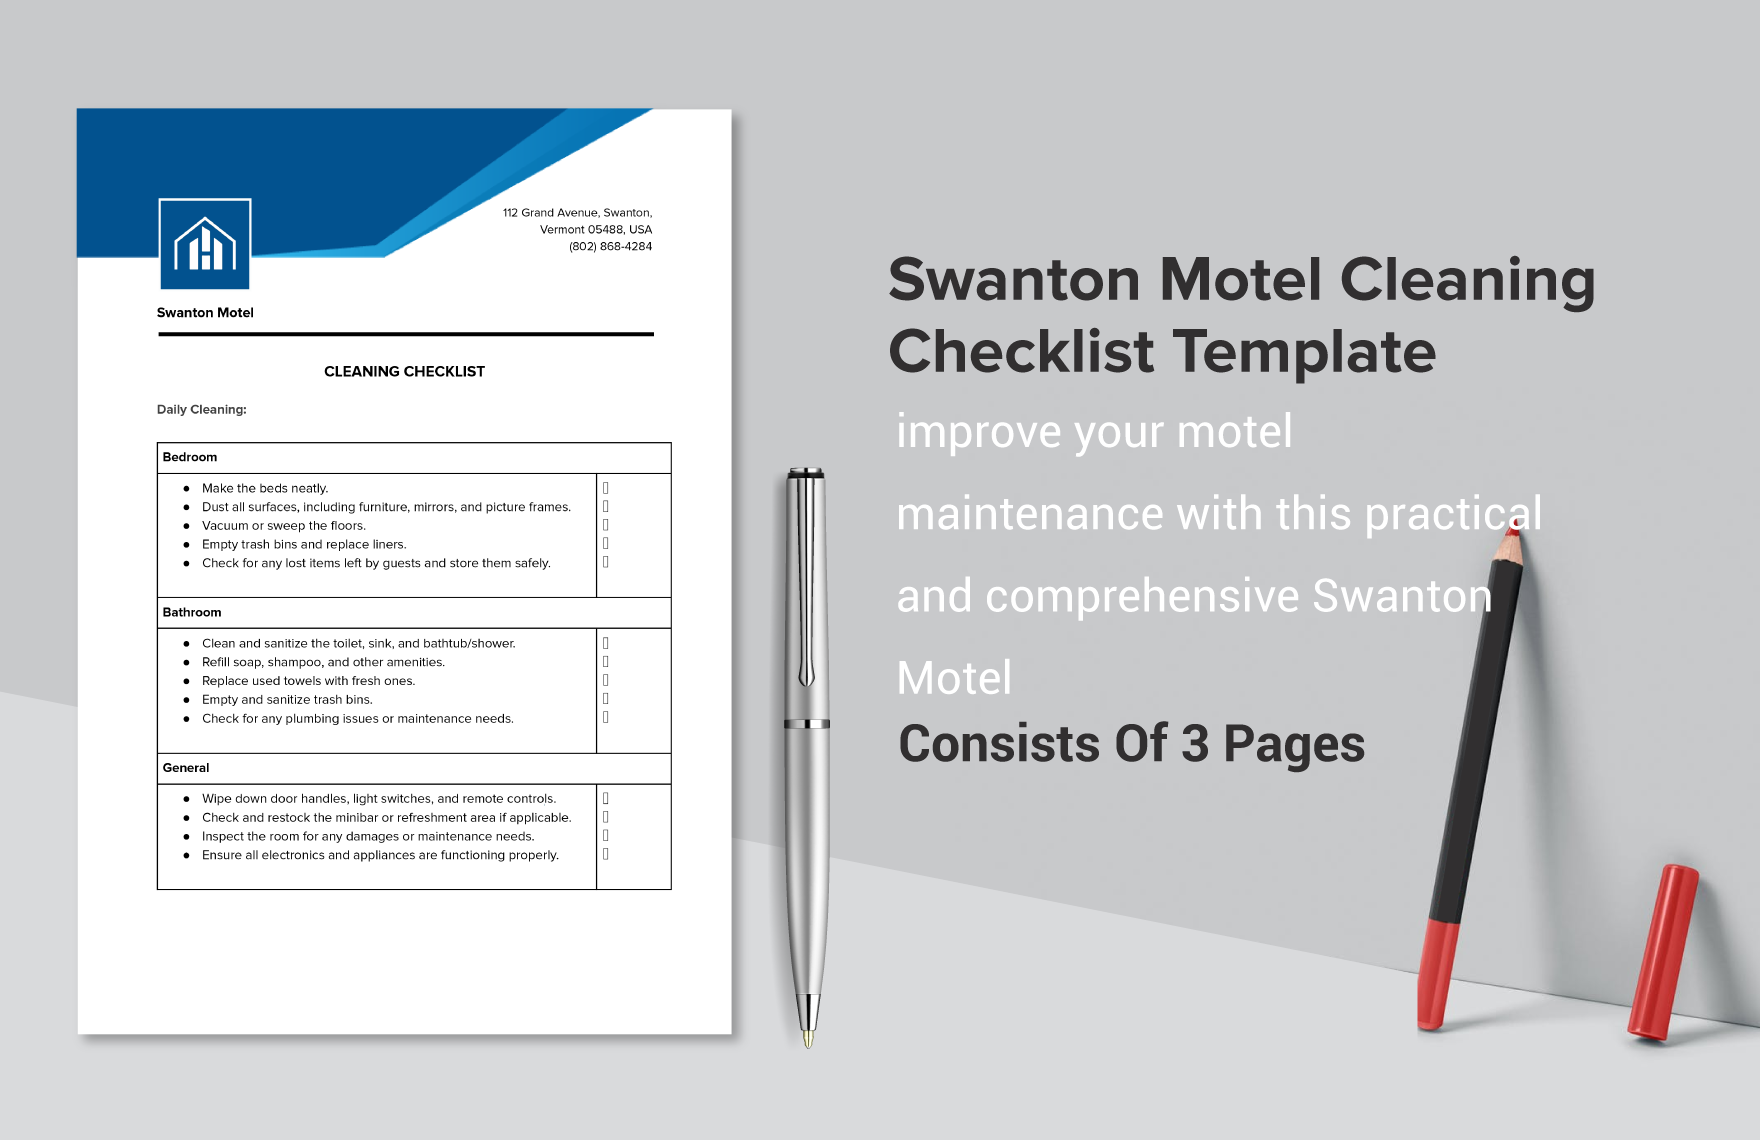 Swanton Motel Cleaning Checklist Template